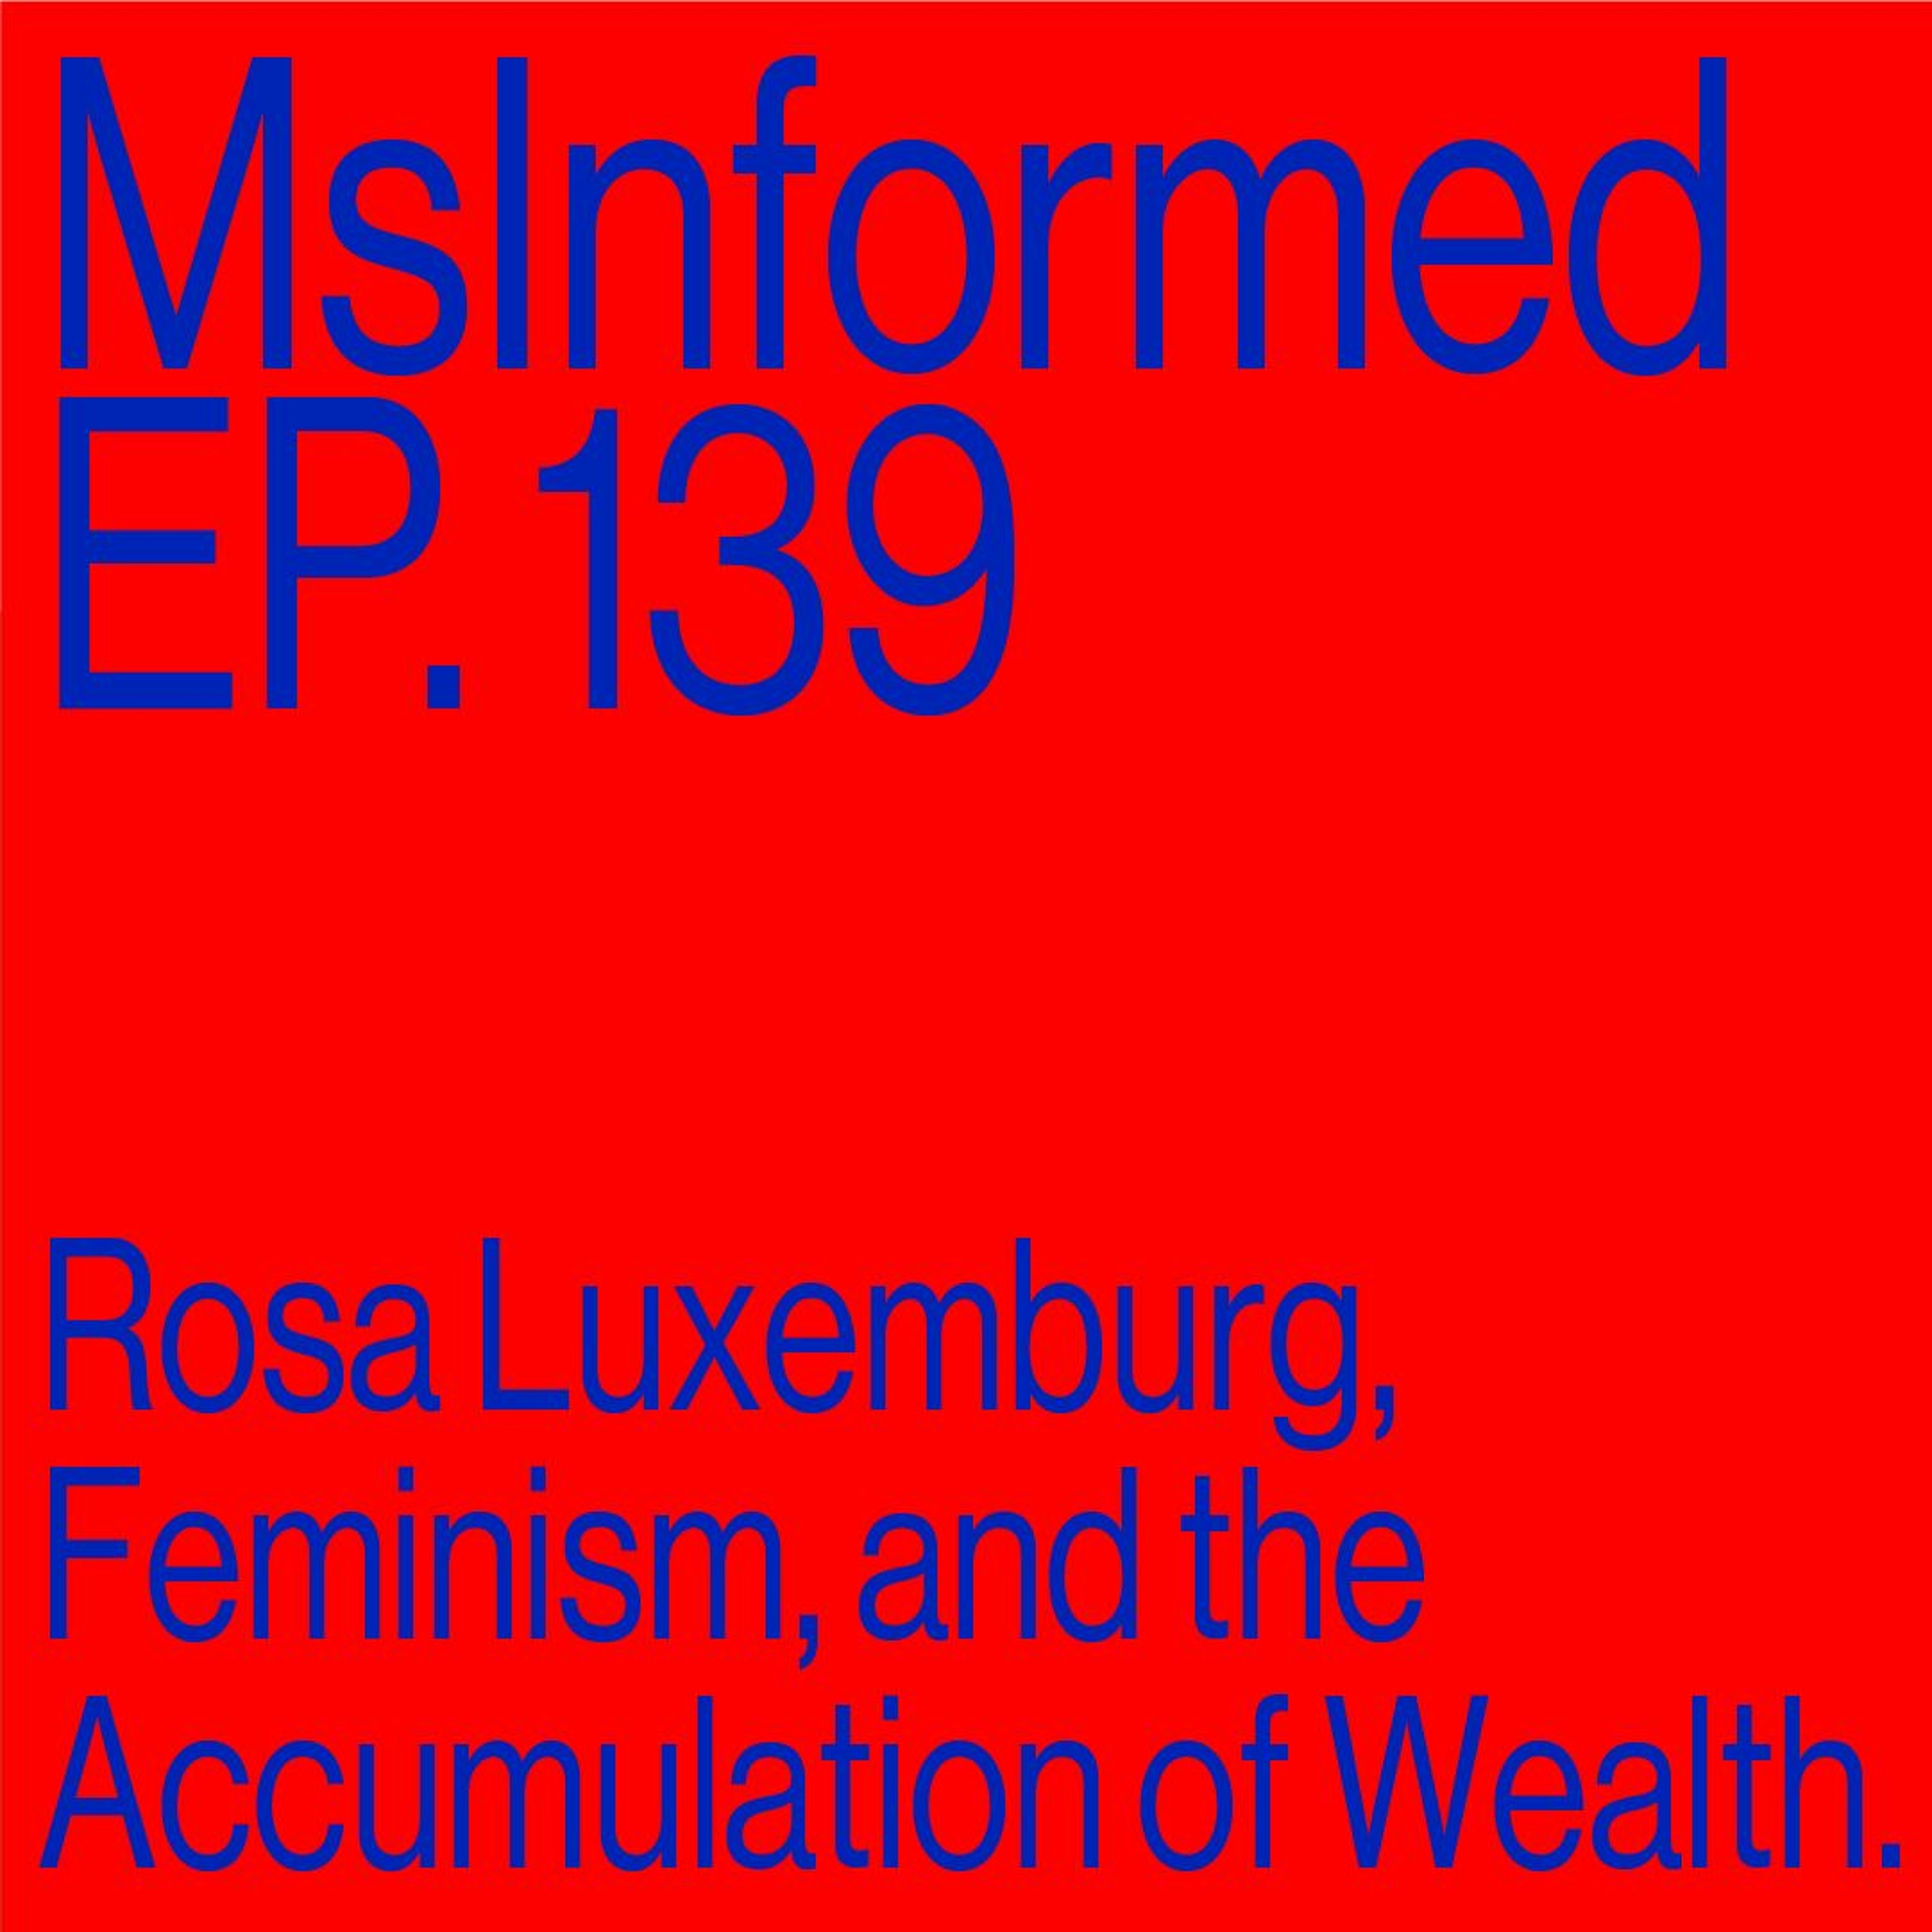 Episode 139: Rosa Luxemburg, Feminism and the Accumulation of Wealth